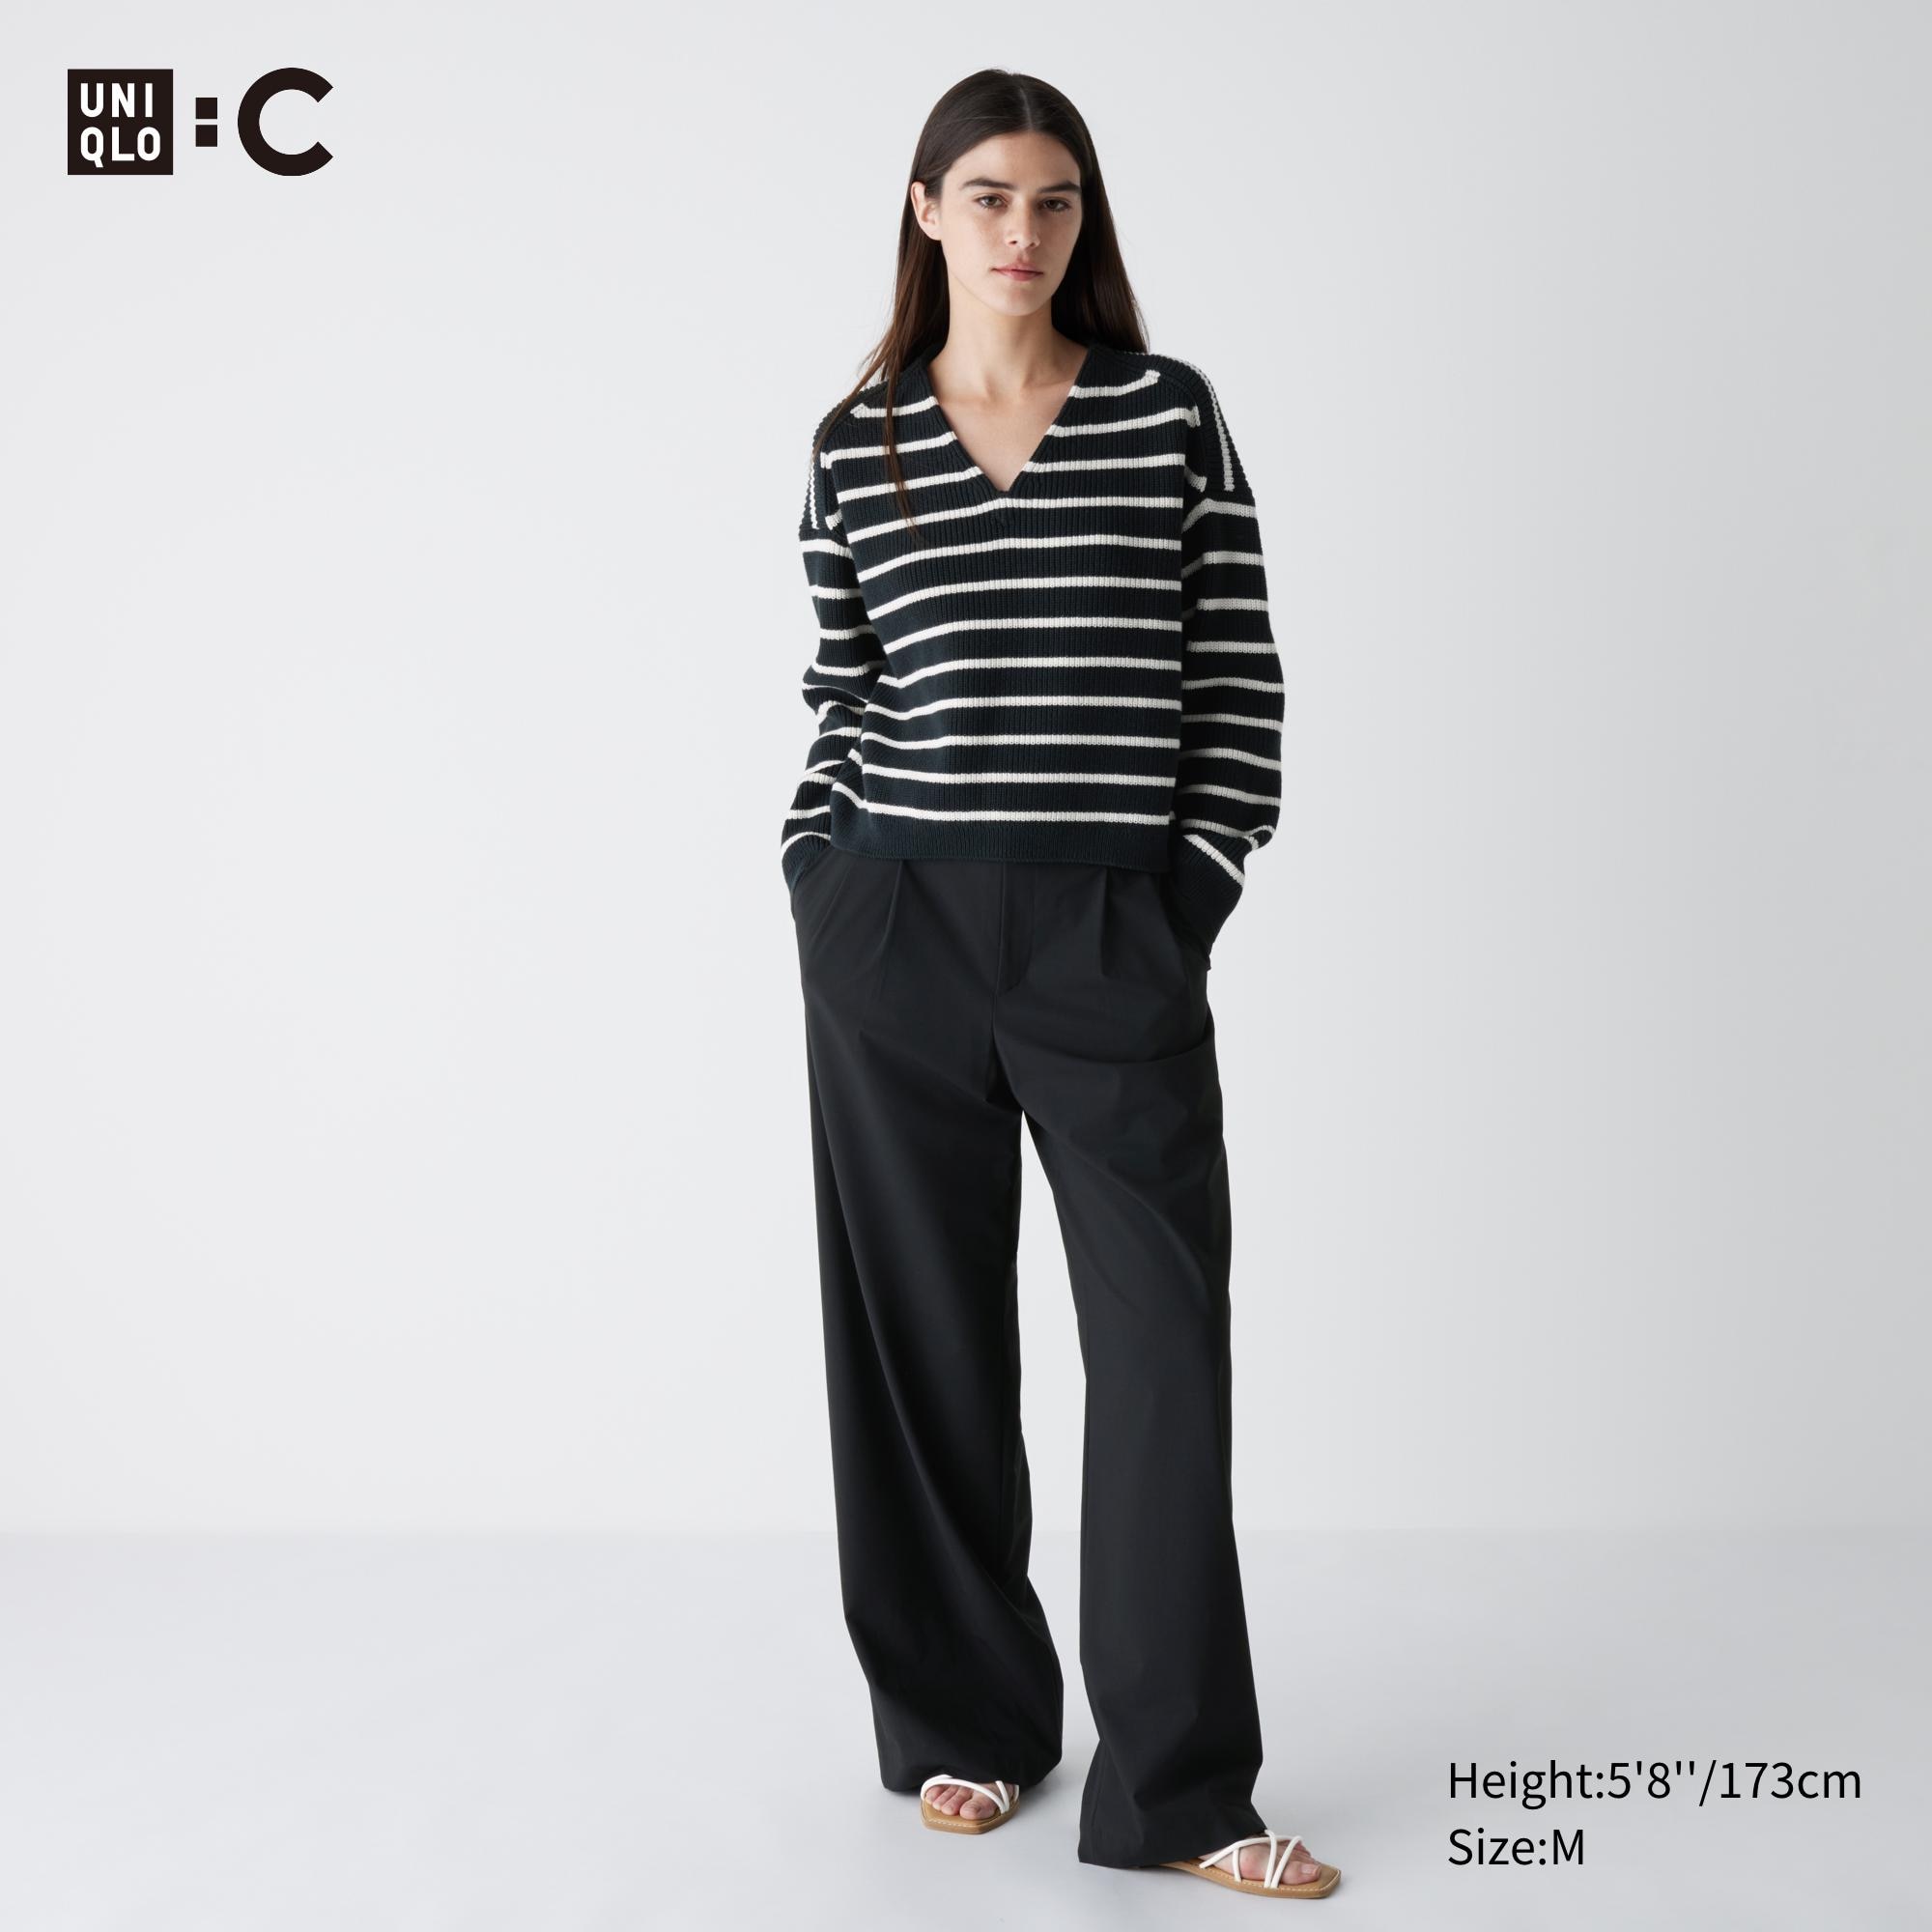 UNIQLO on X: These wide leg pants are going to be in every fashionista's  closet. Hurry and click add to bag before they're gone.   #SimpleMadeBetter #UniqloUSA   / X